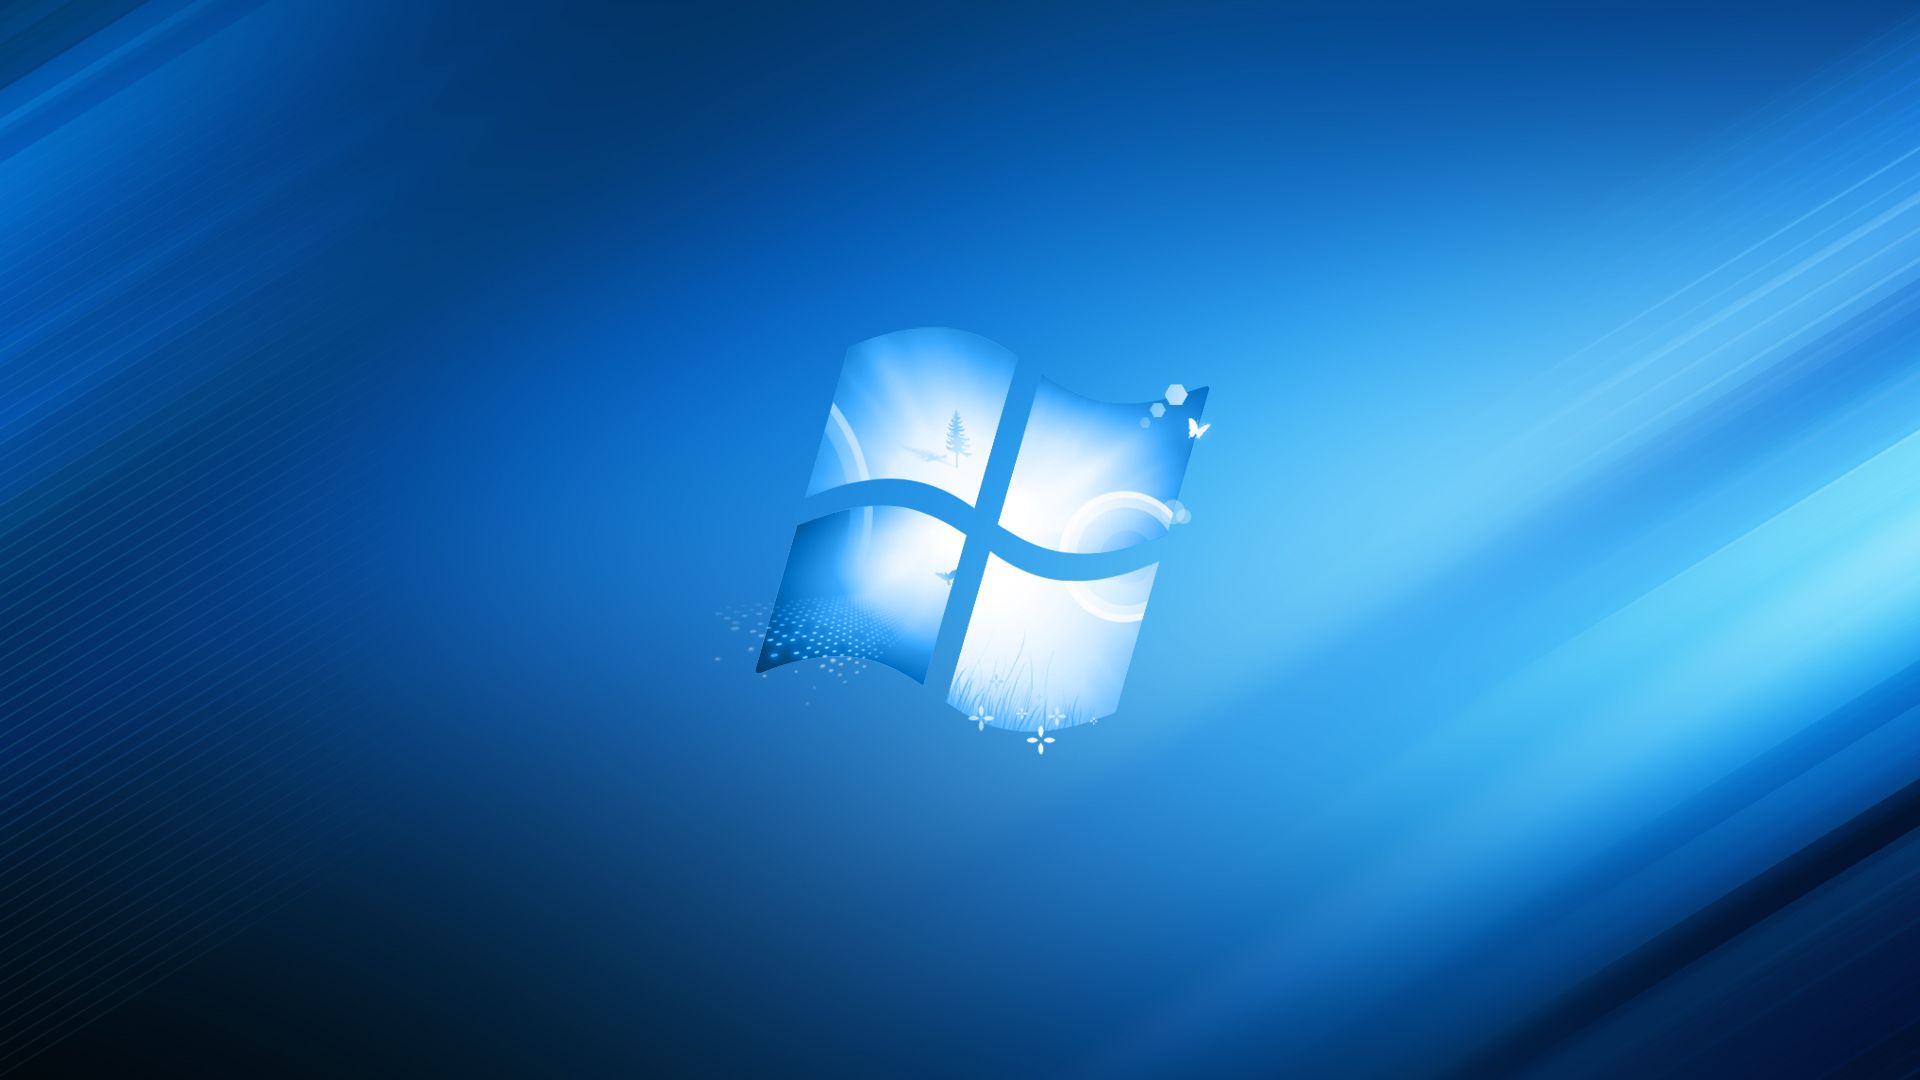 Windows 8 wallpaper pack wallpapers55.com - Best Wallpapers for